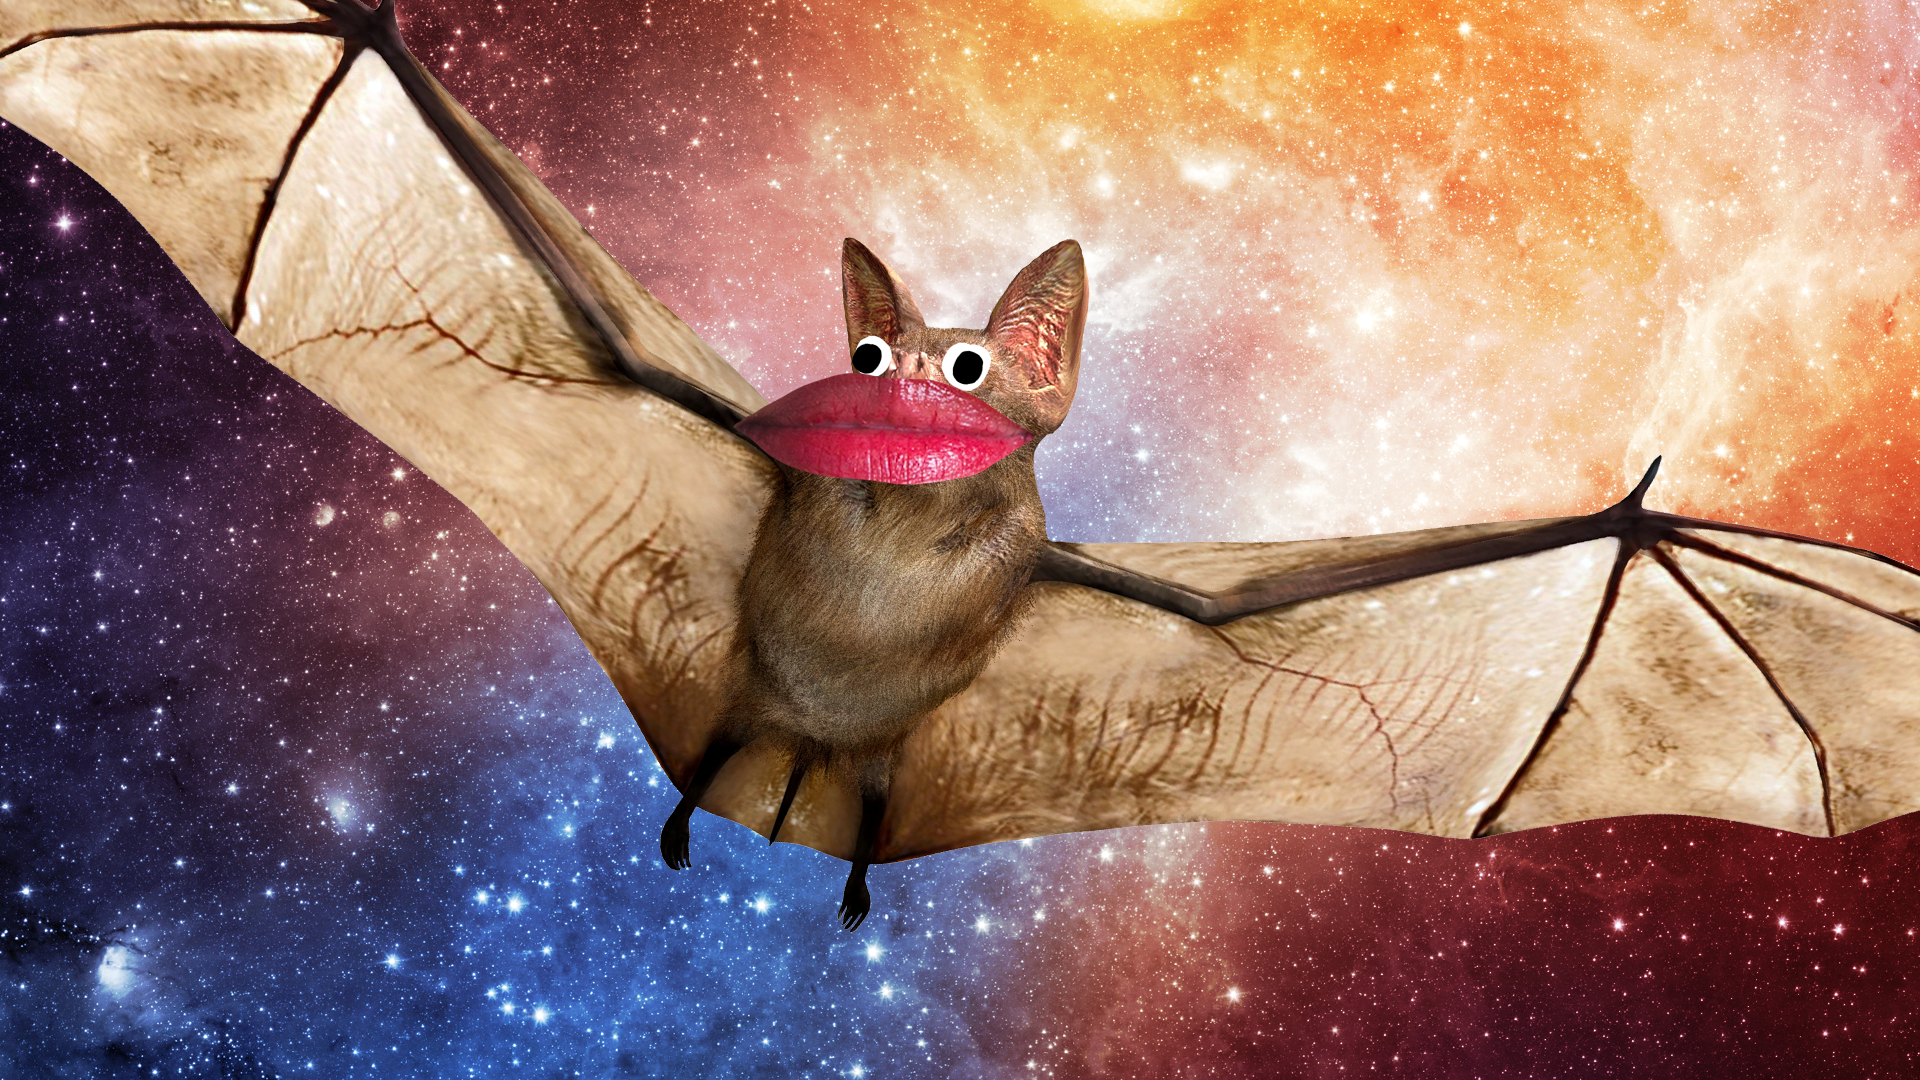 Bat with goofy lips on space background